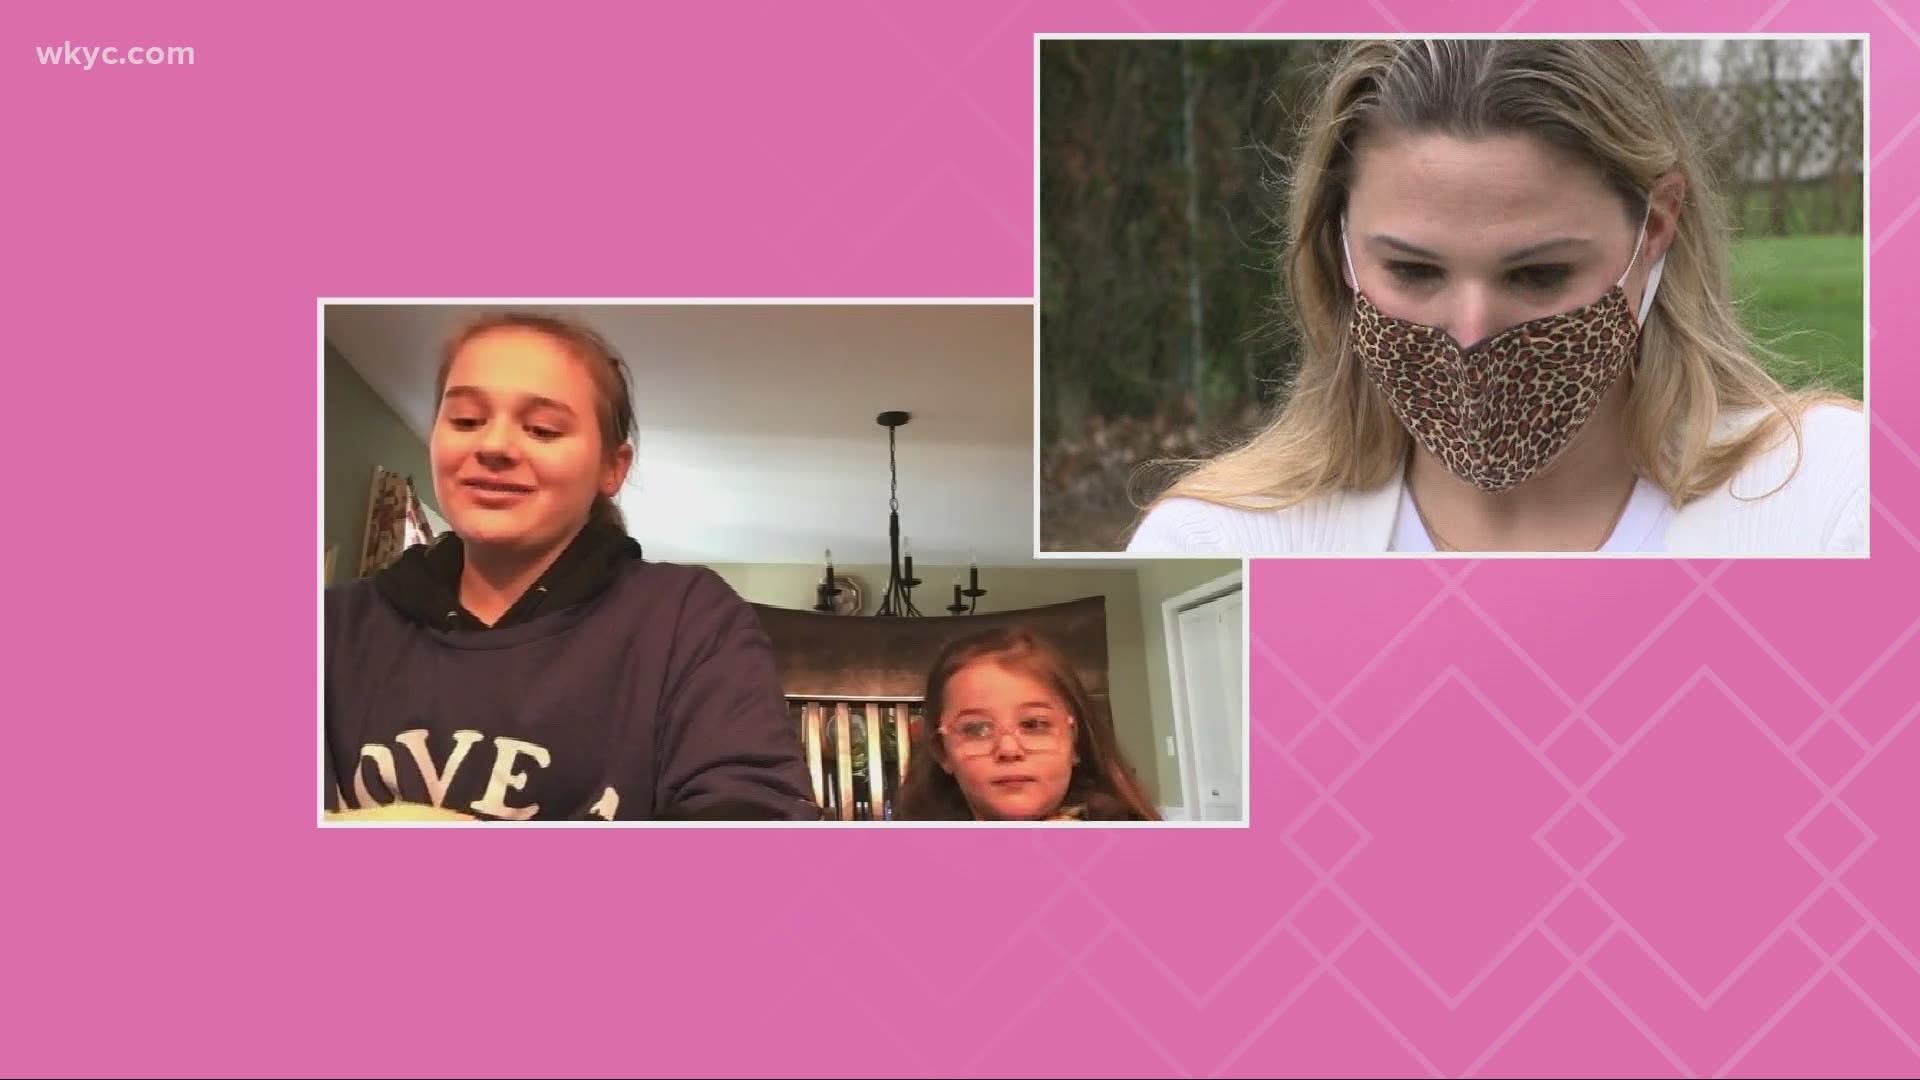 Kelsey Pease has been separated from her girls for two months amid the COVID-19 pandemic. We surprised her with video messages filled with love from her family.